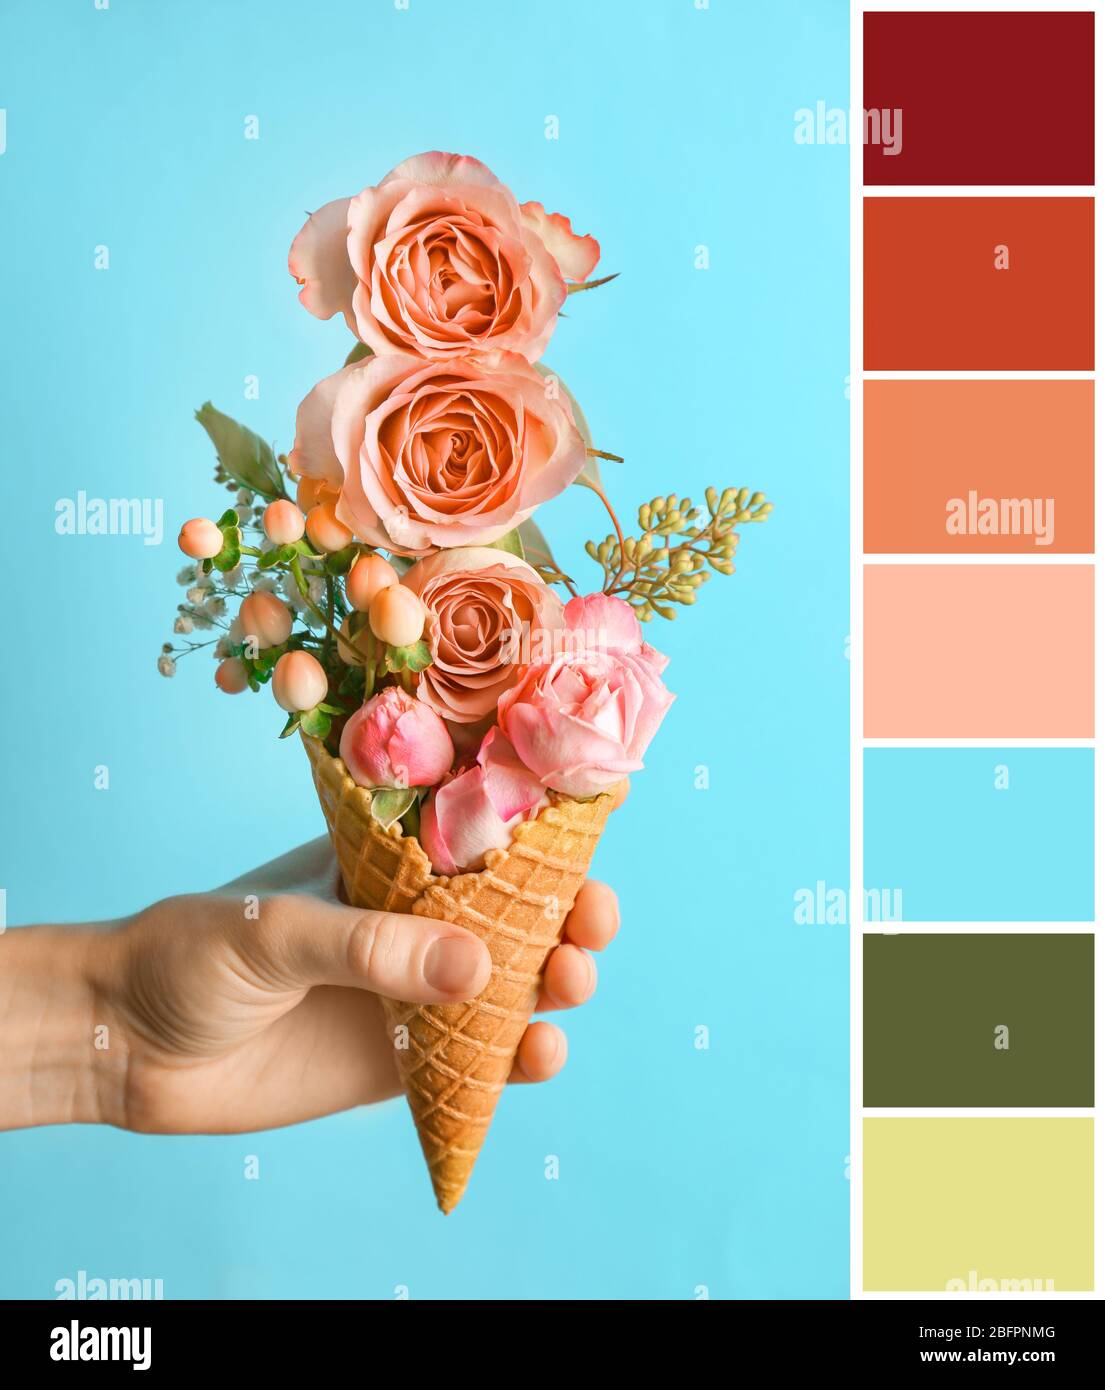 Palette with salmon color and woman holding waffle cone with floral composition on blue background Stock Photo